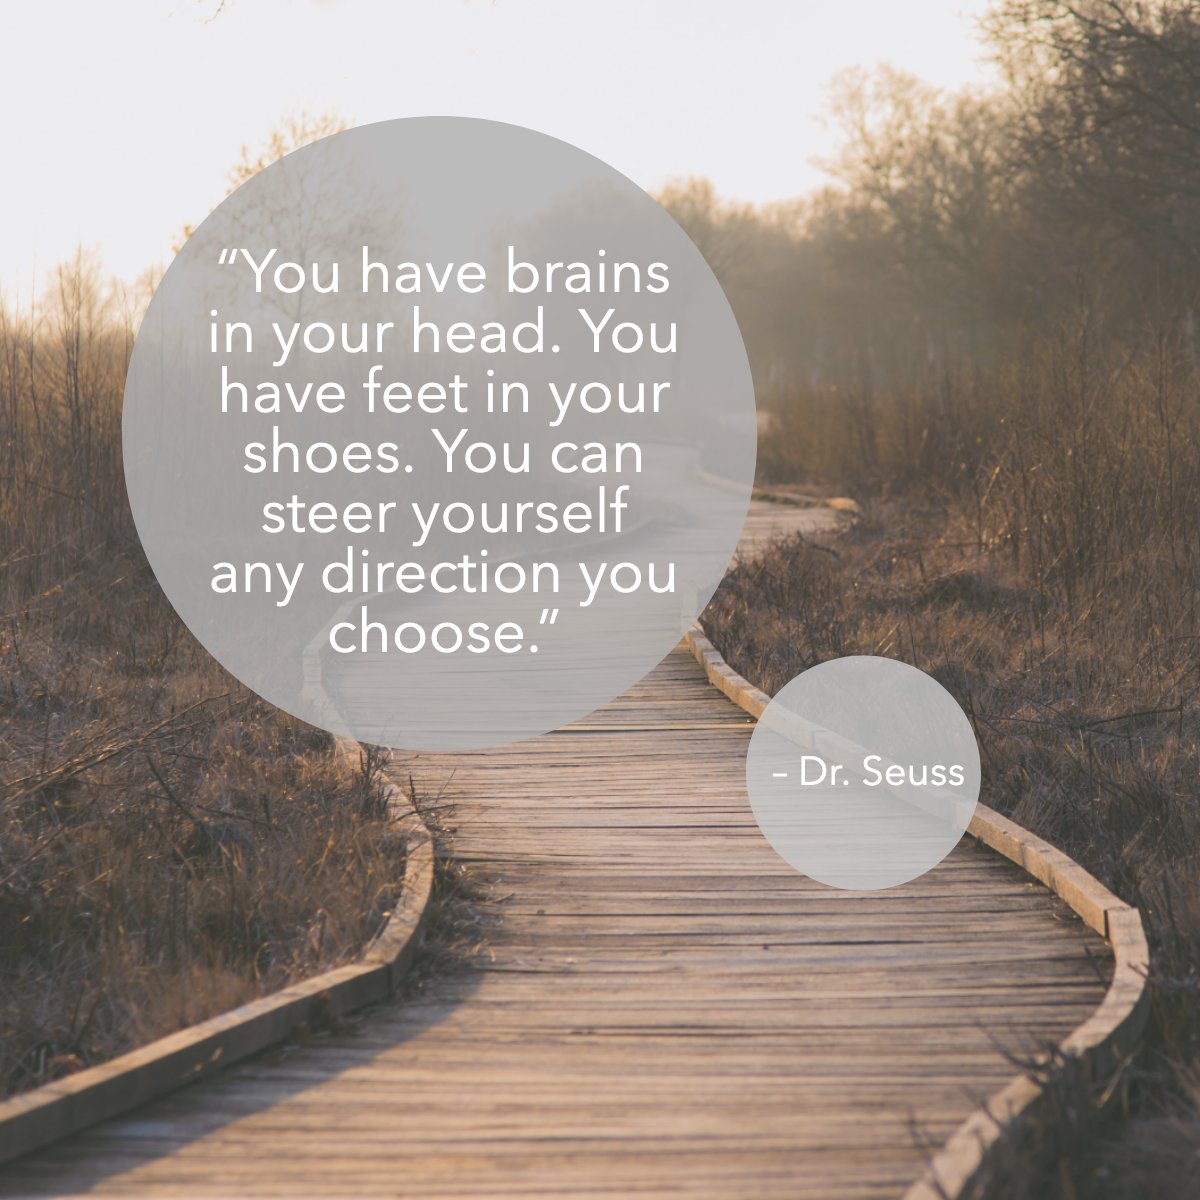 '...You can steer yourself in any direction you choose.'
—Dr. Seuss

#Drseuss #Path #Inspirational #Inspiring #Quote
#Walkaway
 #Whoyouworkwithmatters #NolaRealEstate #LovewhoIworkwith #REALTOR #Homeowners #LoveWhereYouLive #Experiencematters #Homeinvestment